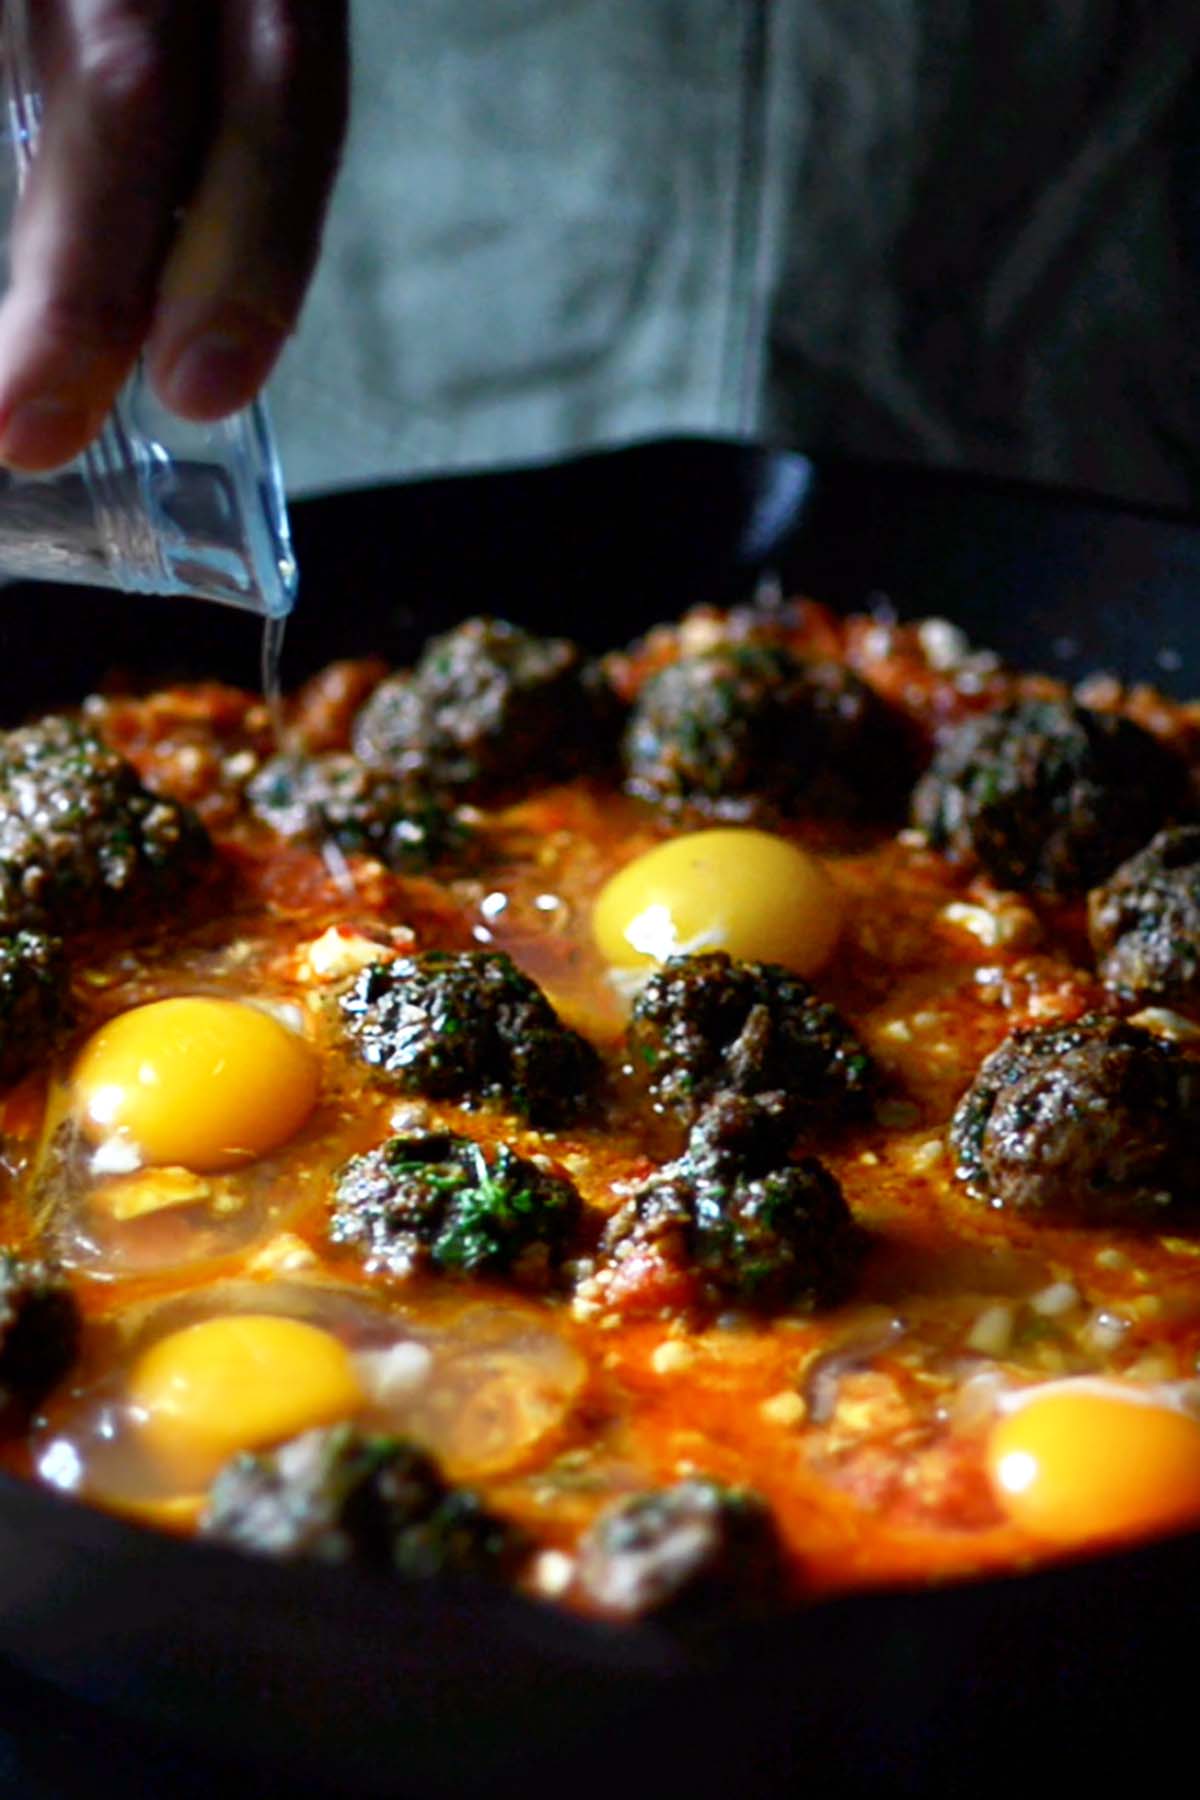 Eggs added to a cast iron skillet full of shakshuka and meatballs.